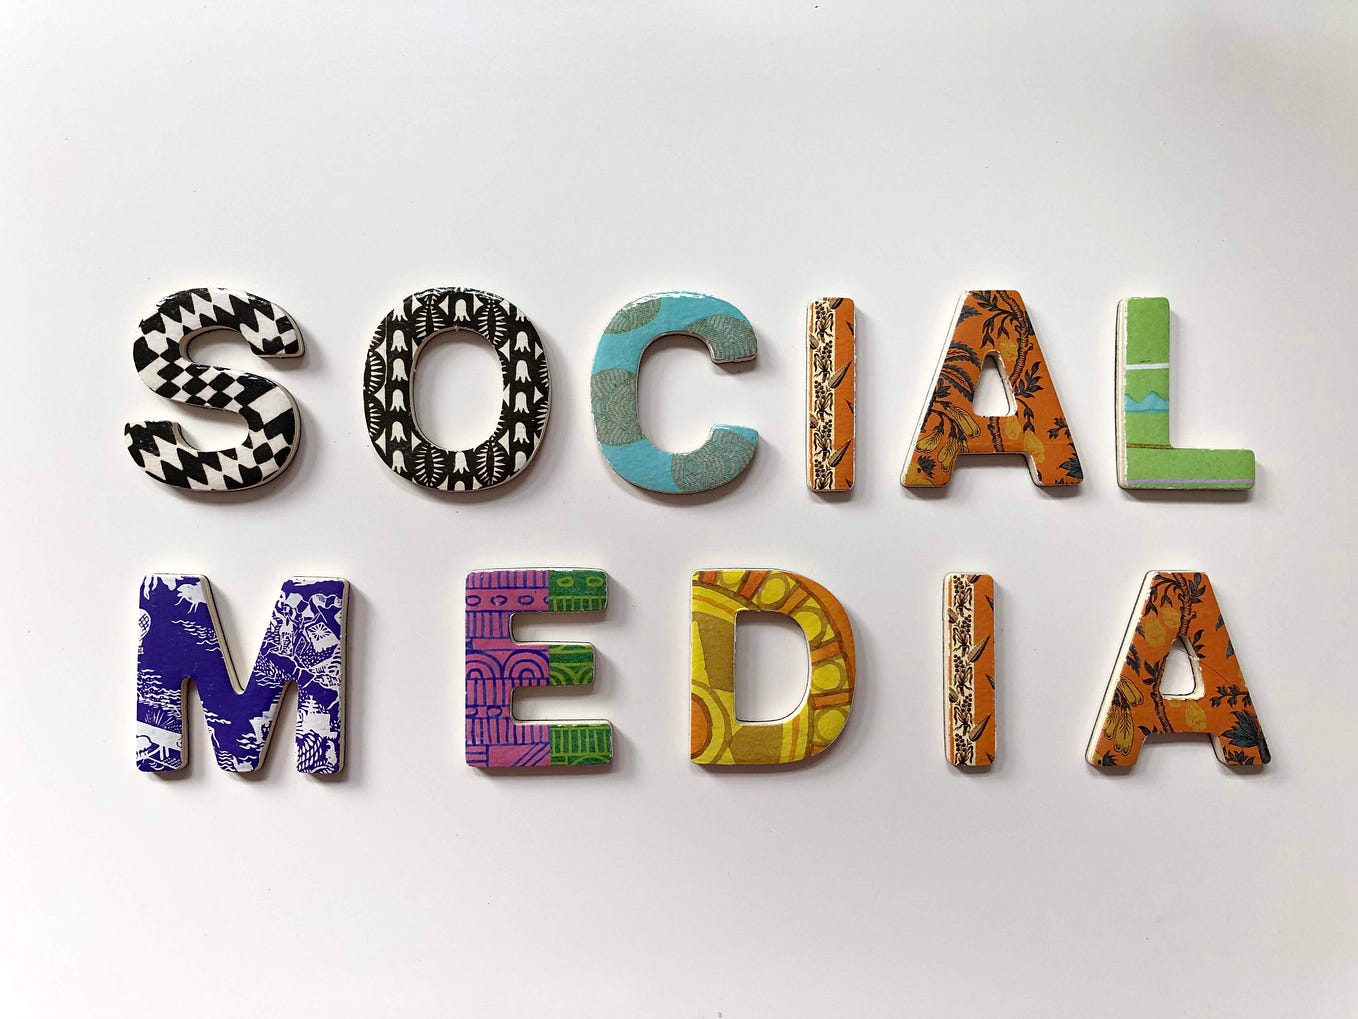 The 10 Factors That Will Make Your Social Media Marketing Campaign Profitable